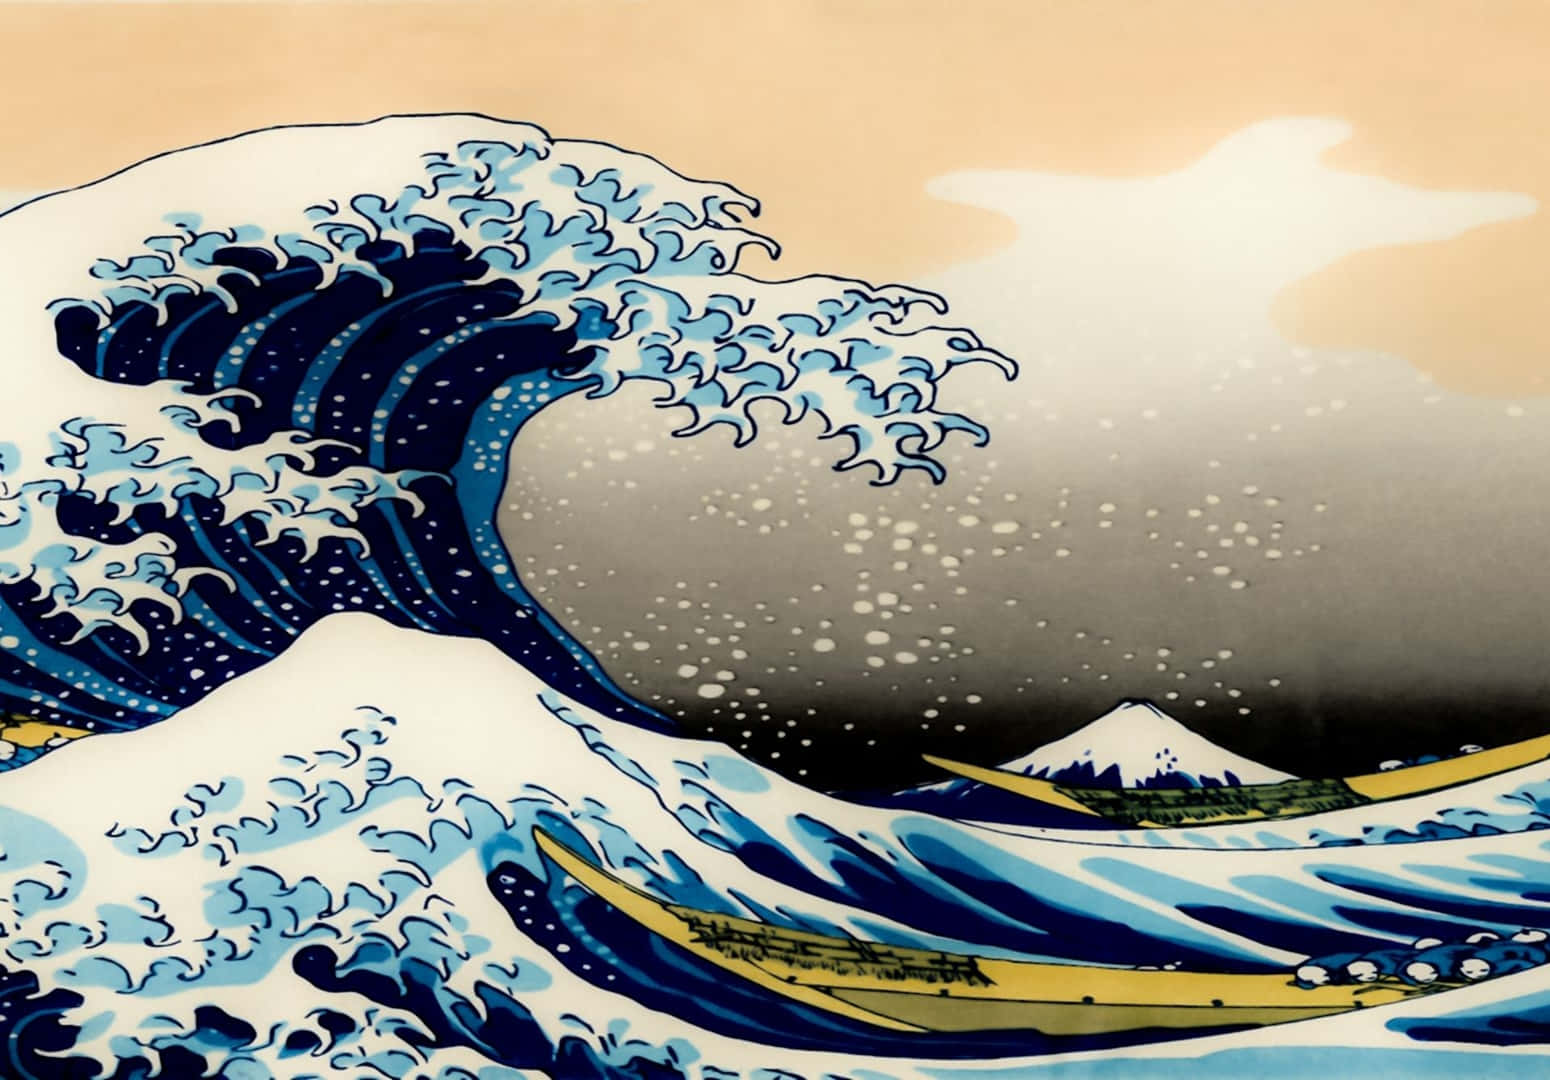 The Great Wave Digital Painting Wallpaper